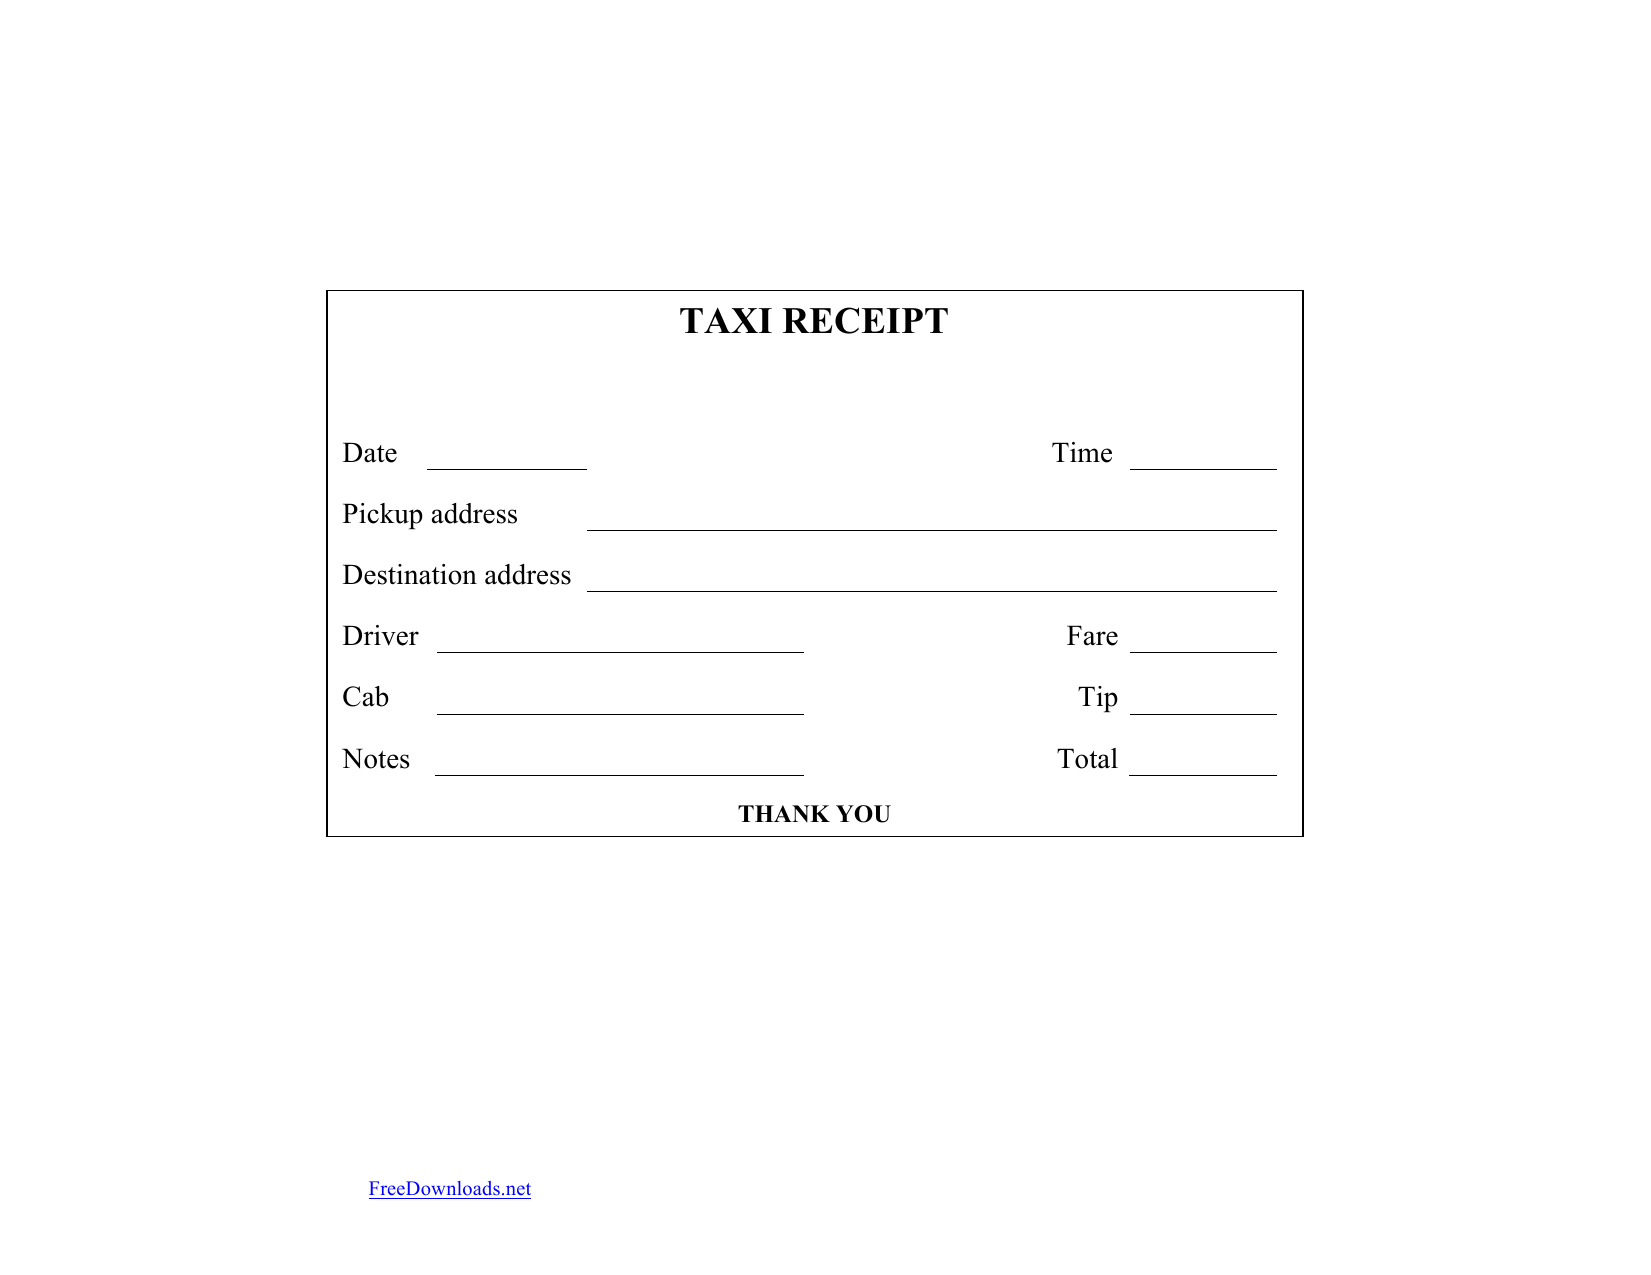 Taxi Receipt Pdf - Dalep.midnightpig.co With Regard To Blank Taxi Receipt Template